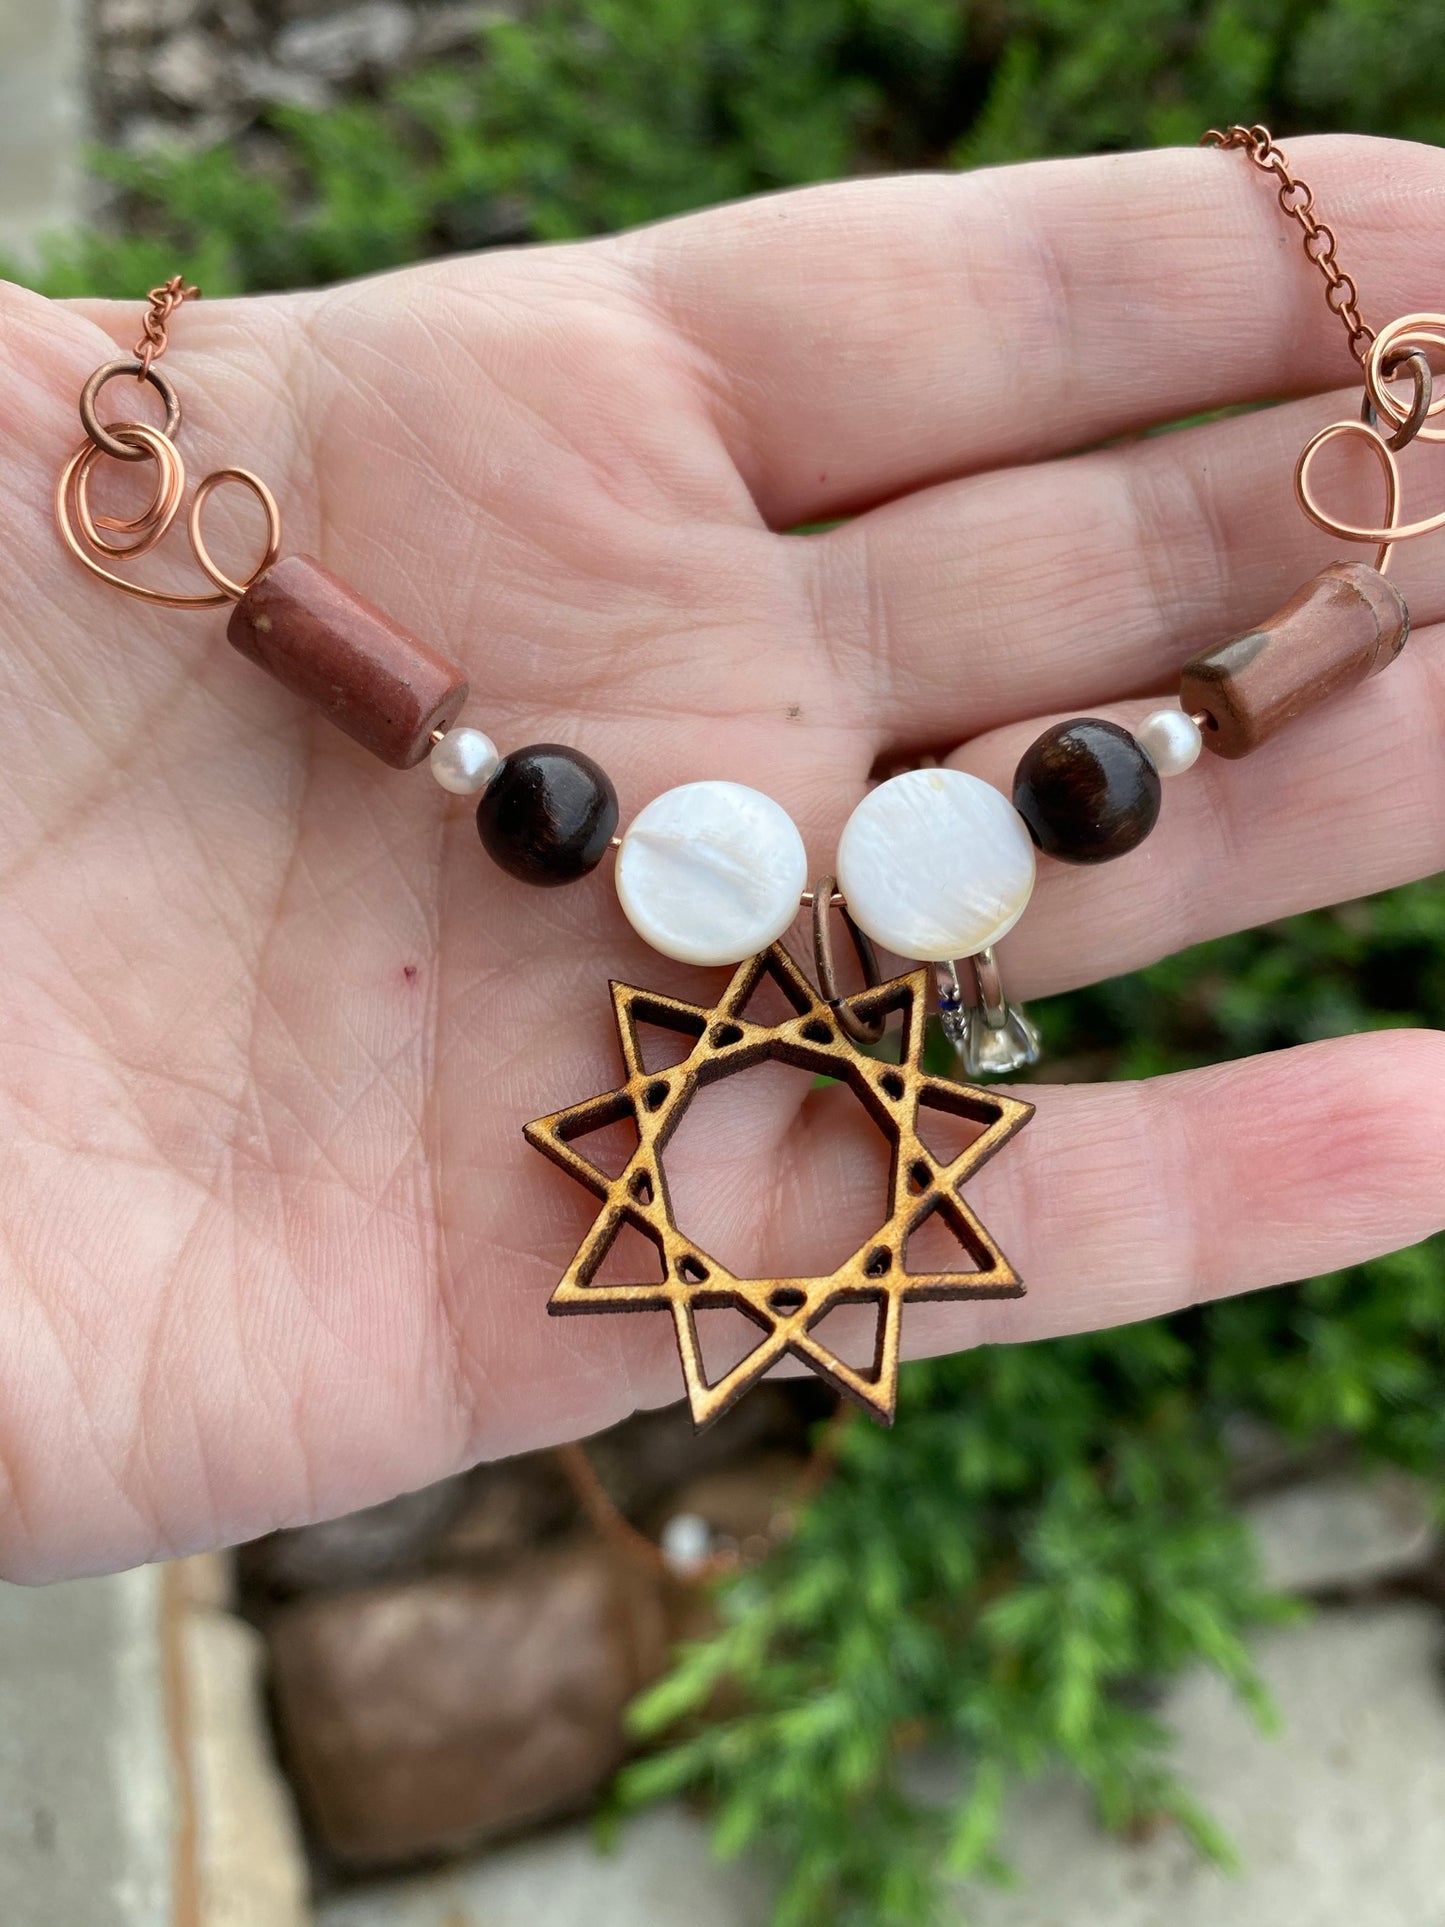 Nine Pointed Star Necklace and Earring Set with Beads and Wood